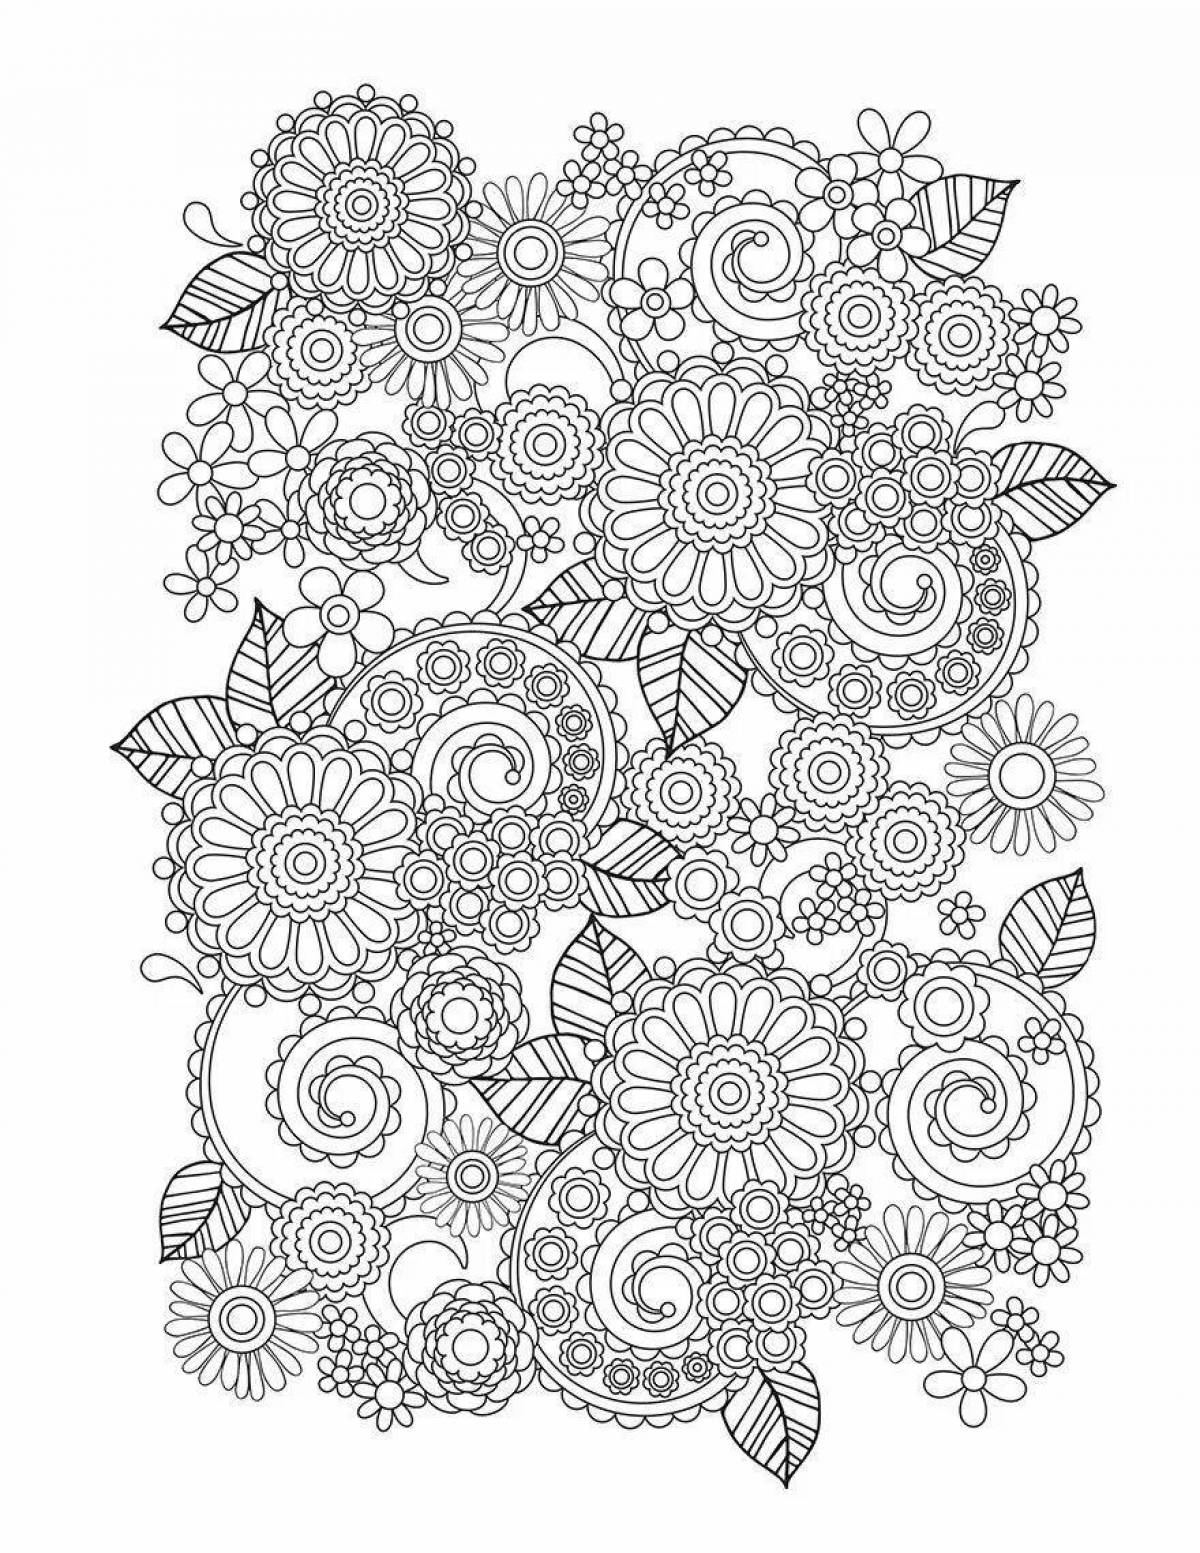 Relaxing large anti-stress coloring book